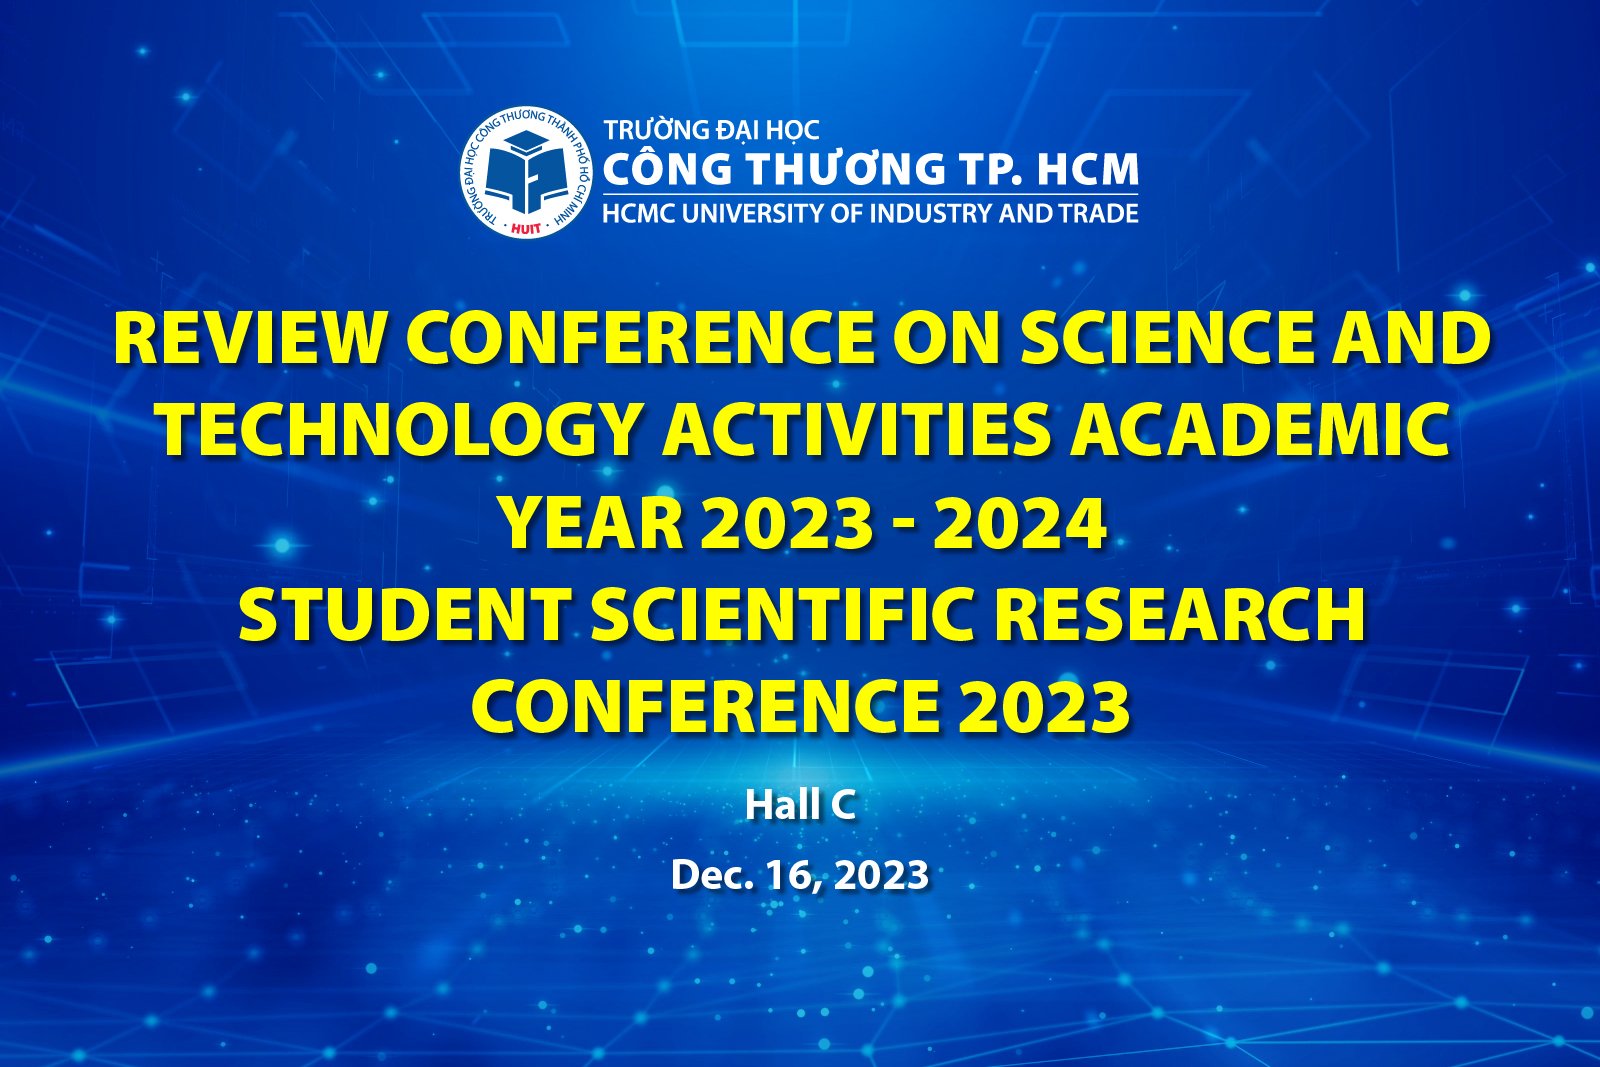 Review Conference on Science and Technology Activities Academic Year 2023 - 2024 and Students Scientific Research Conference 2023